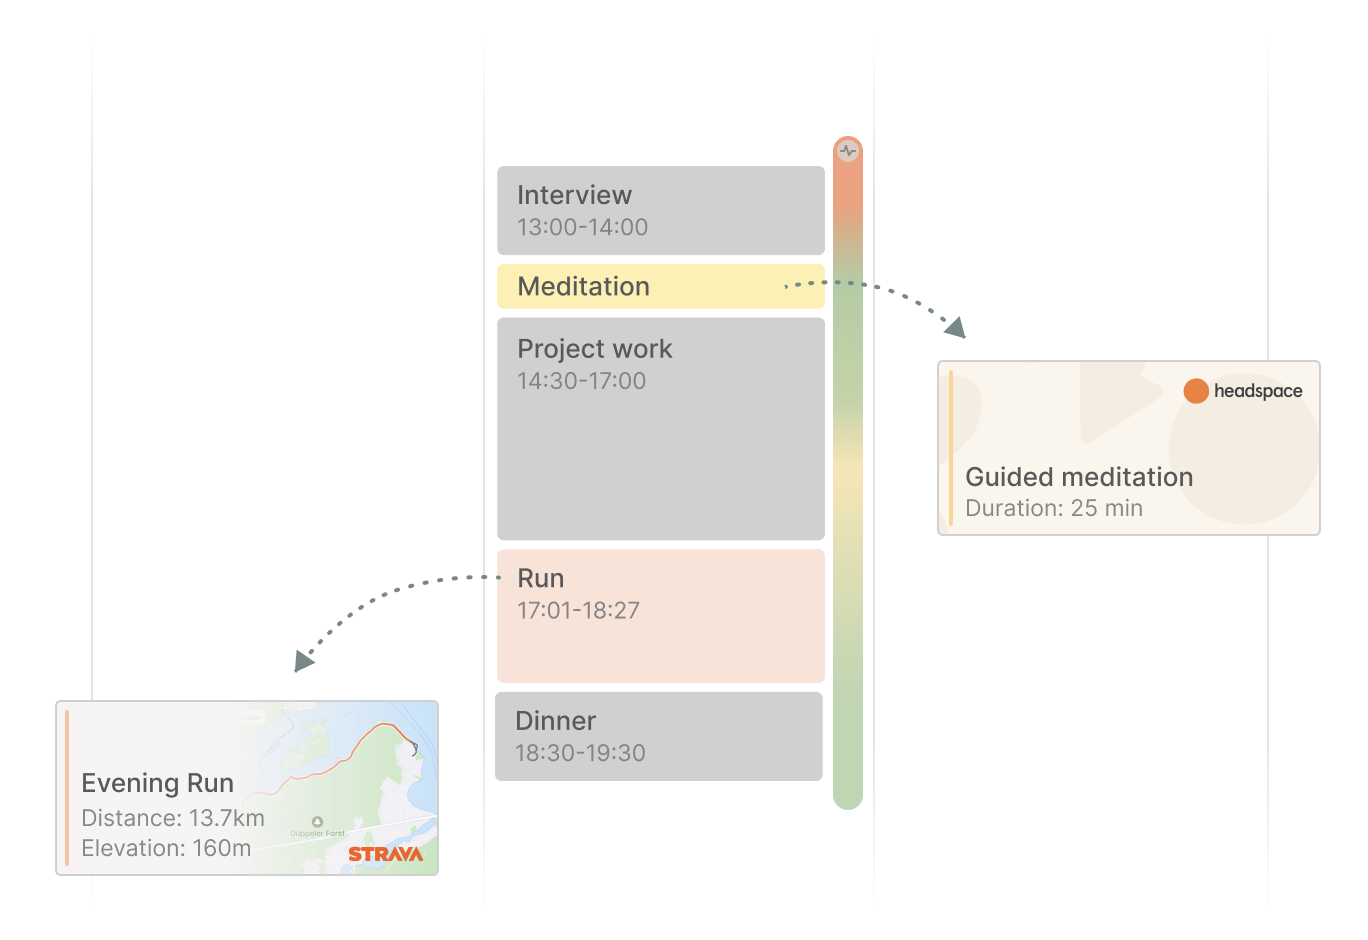 Calendar integrating with Strava and headspace